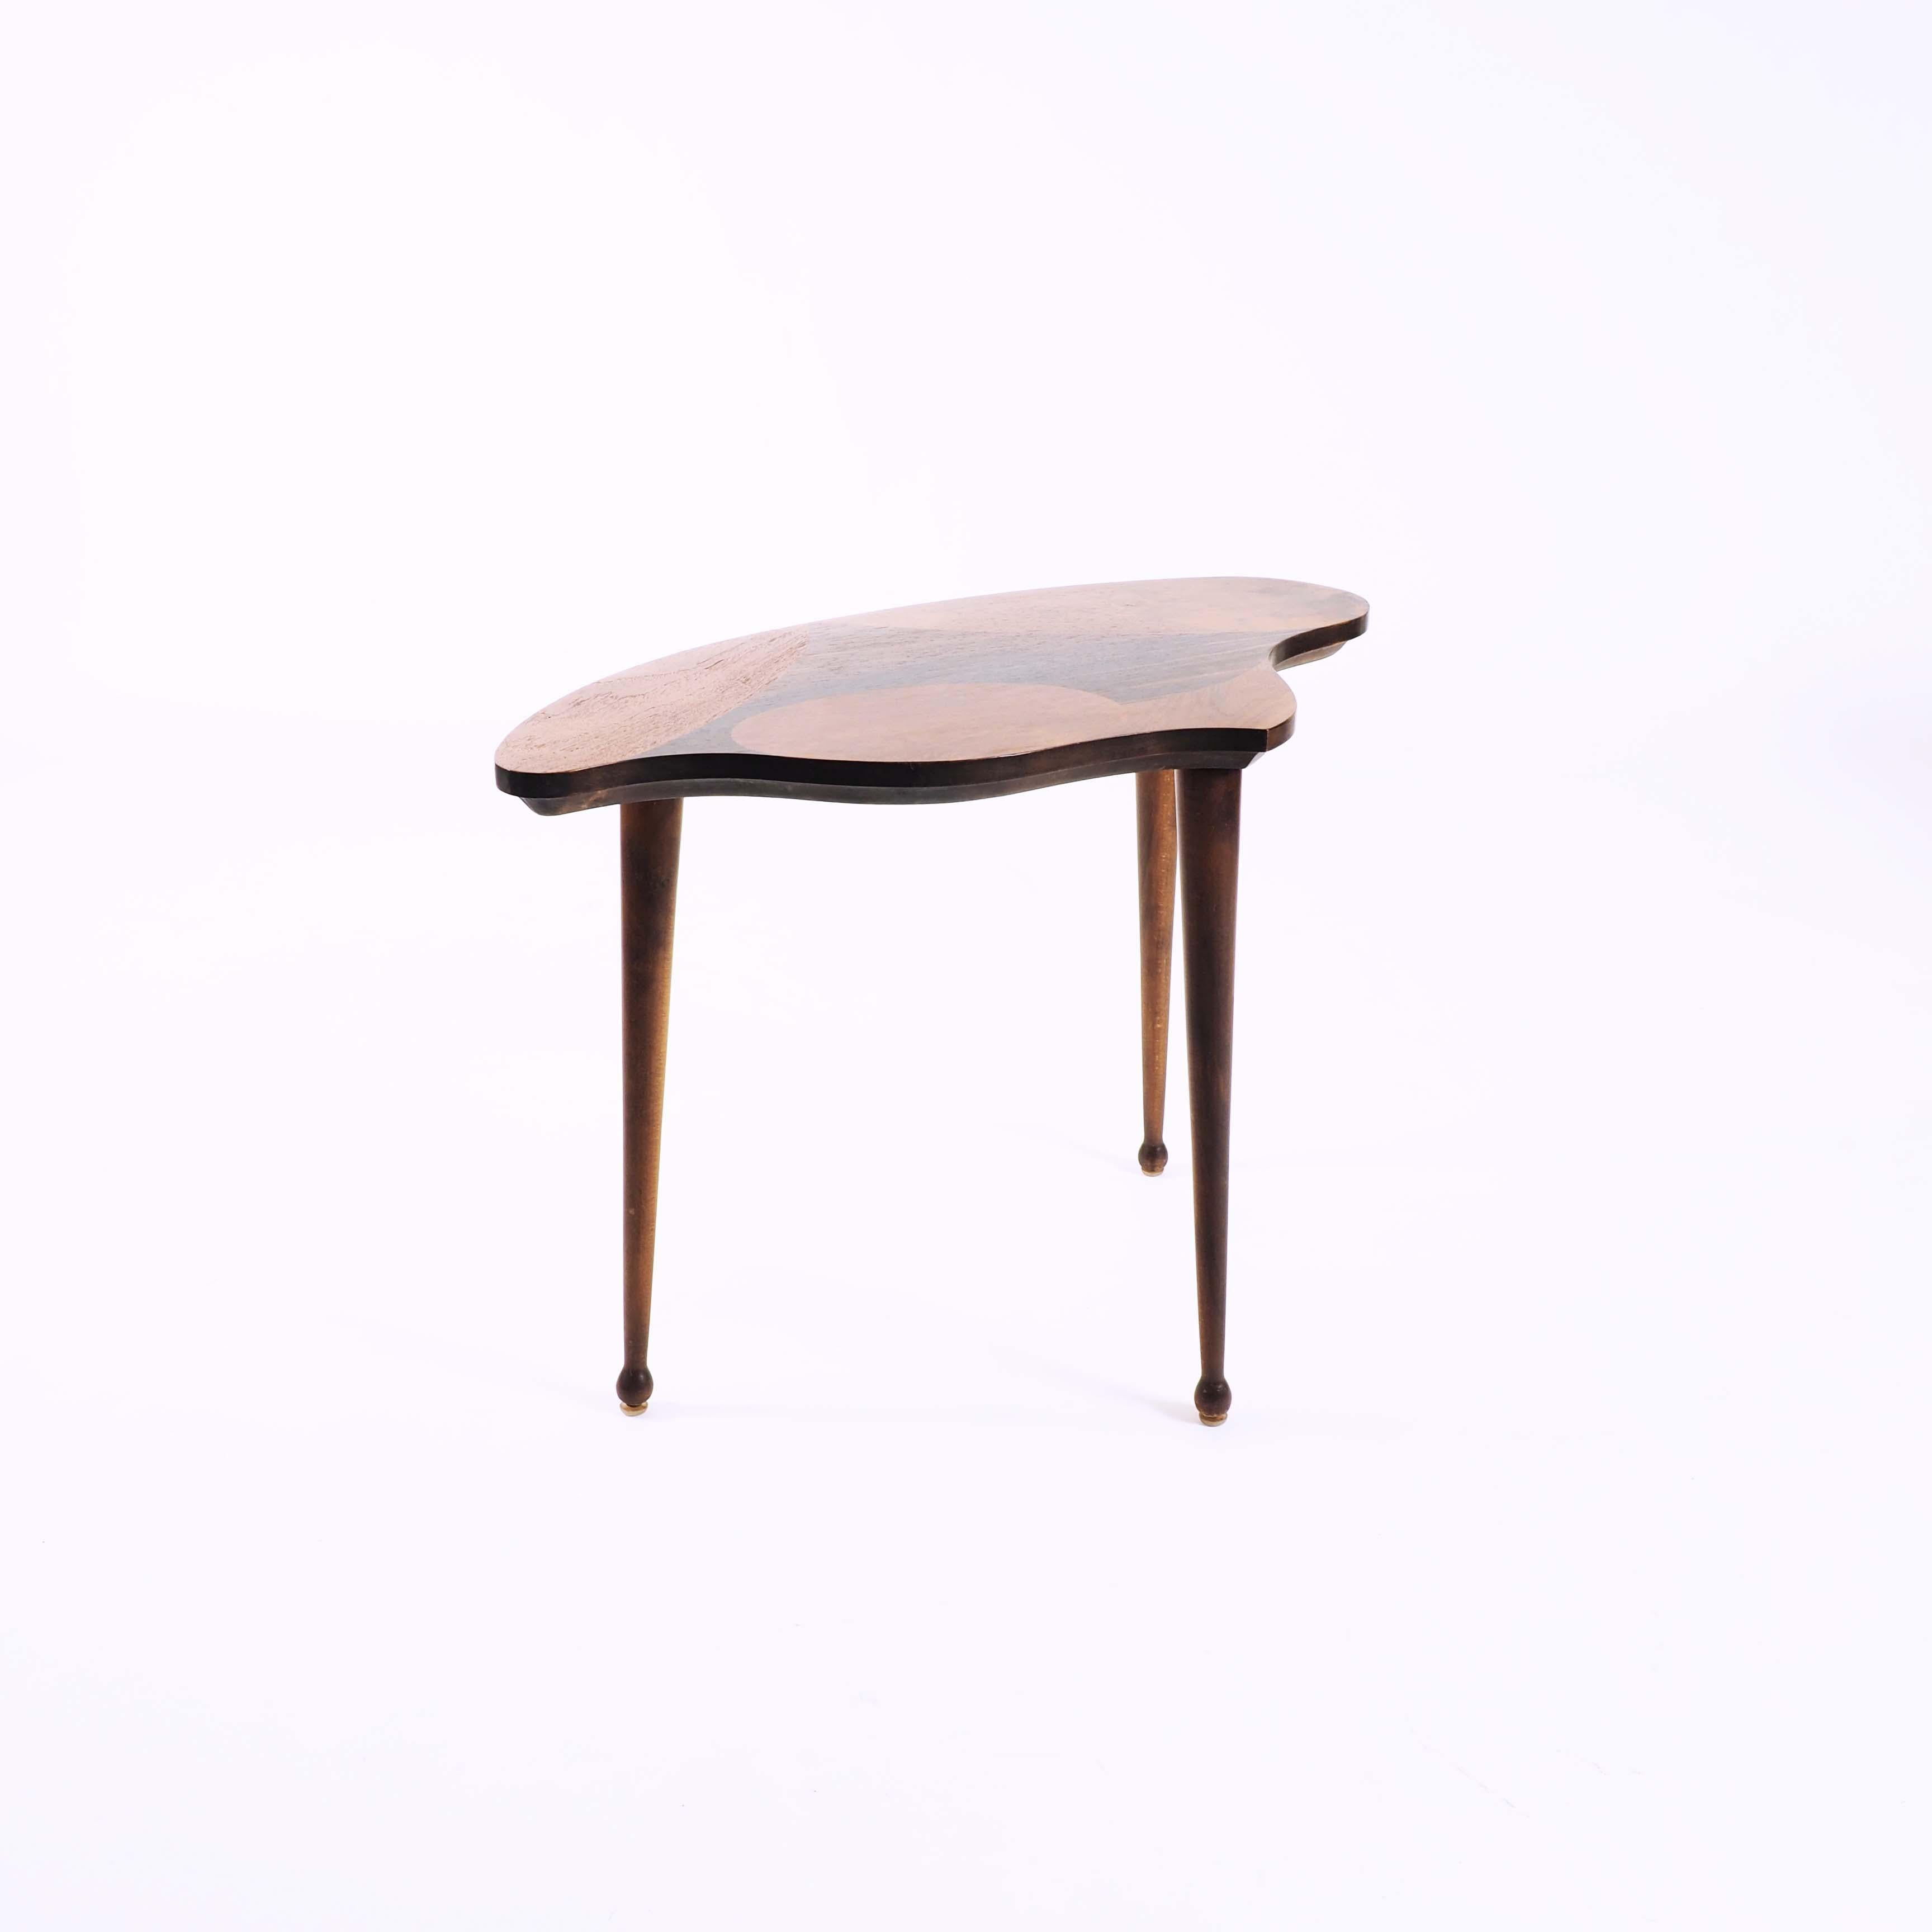 Mid-20th Century Organic Shaped Swedish Side Table with Inlaid Wood